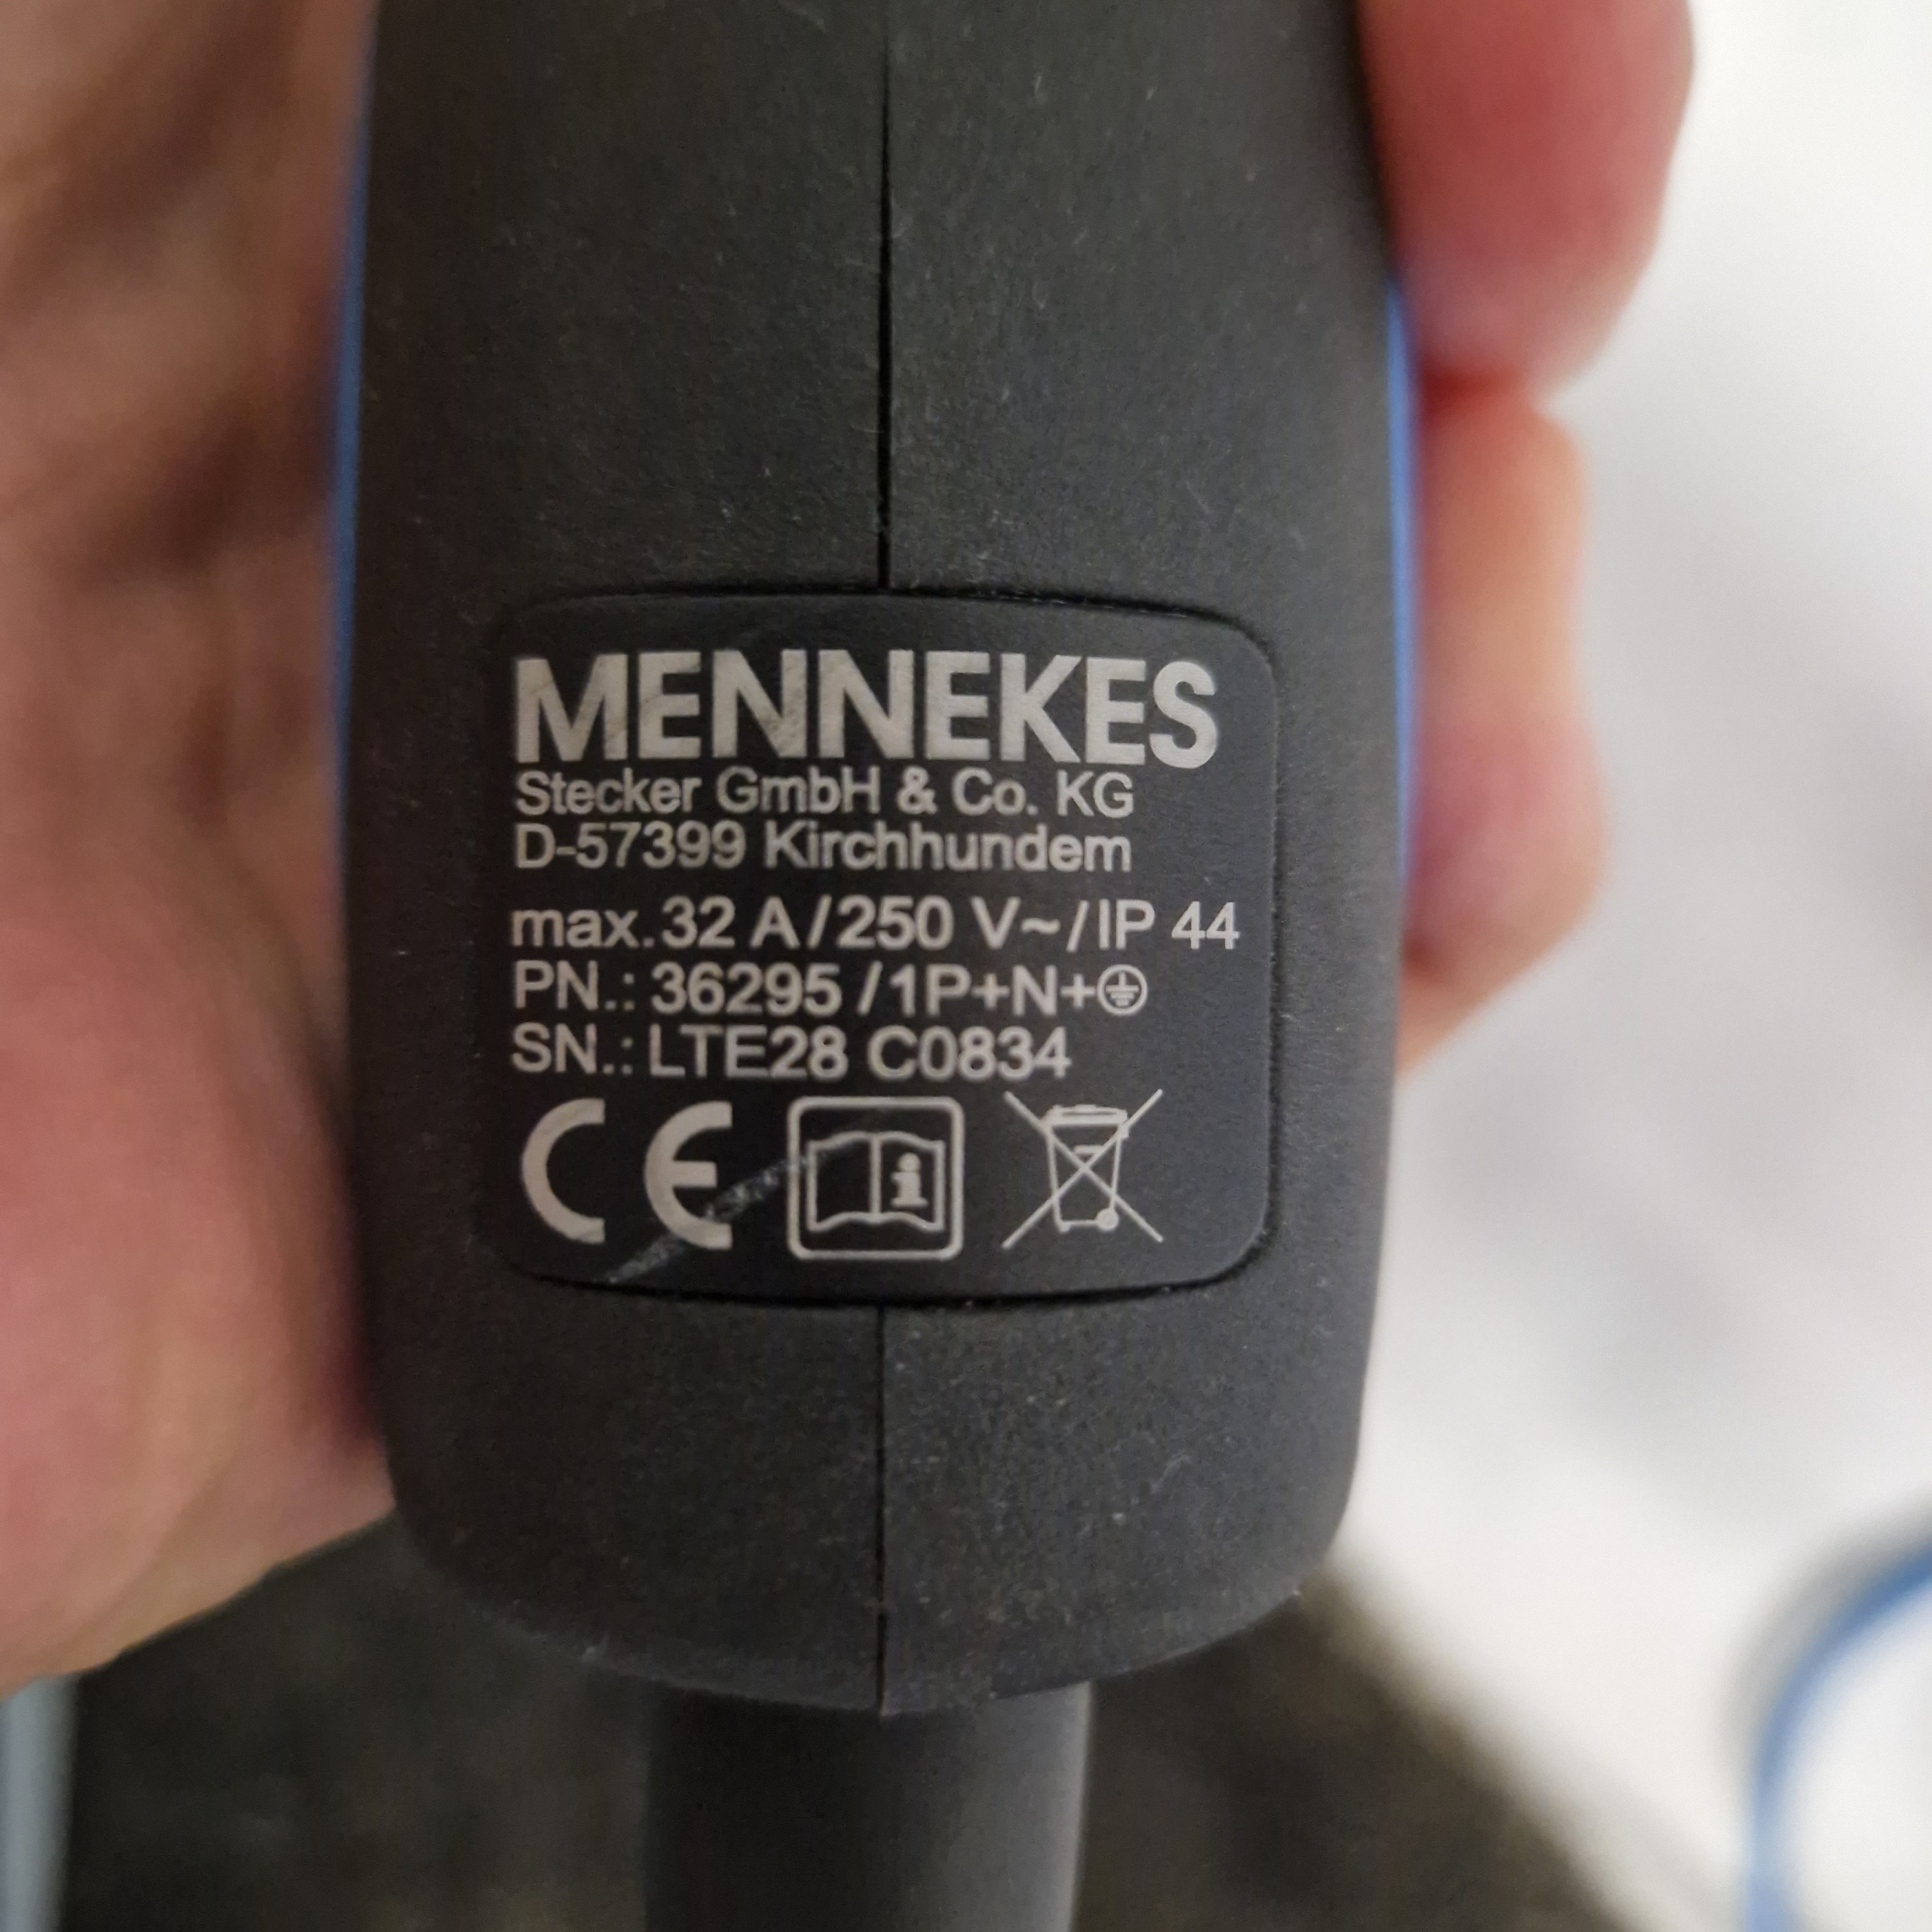 The manufacturer's label on the handle of the charging cable